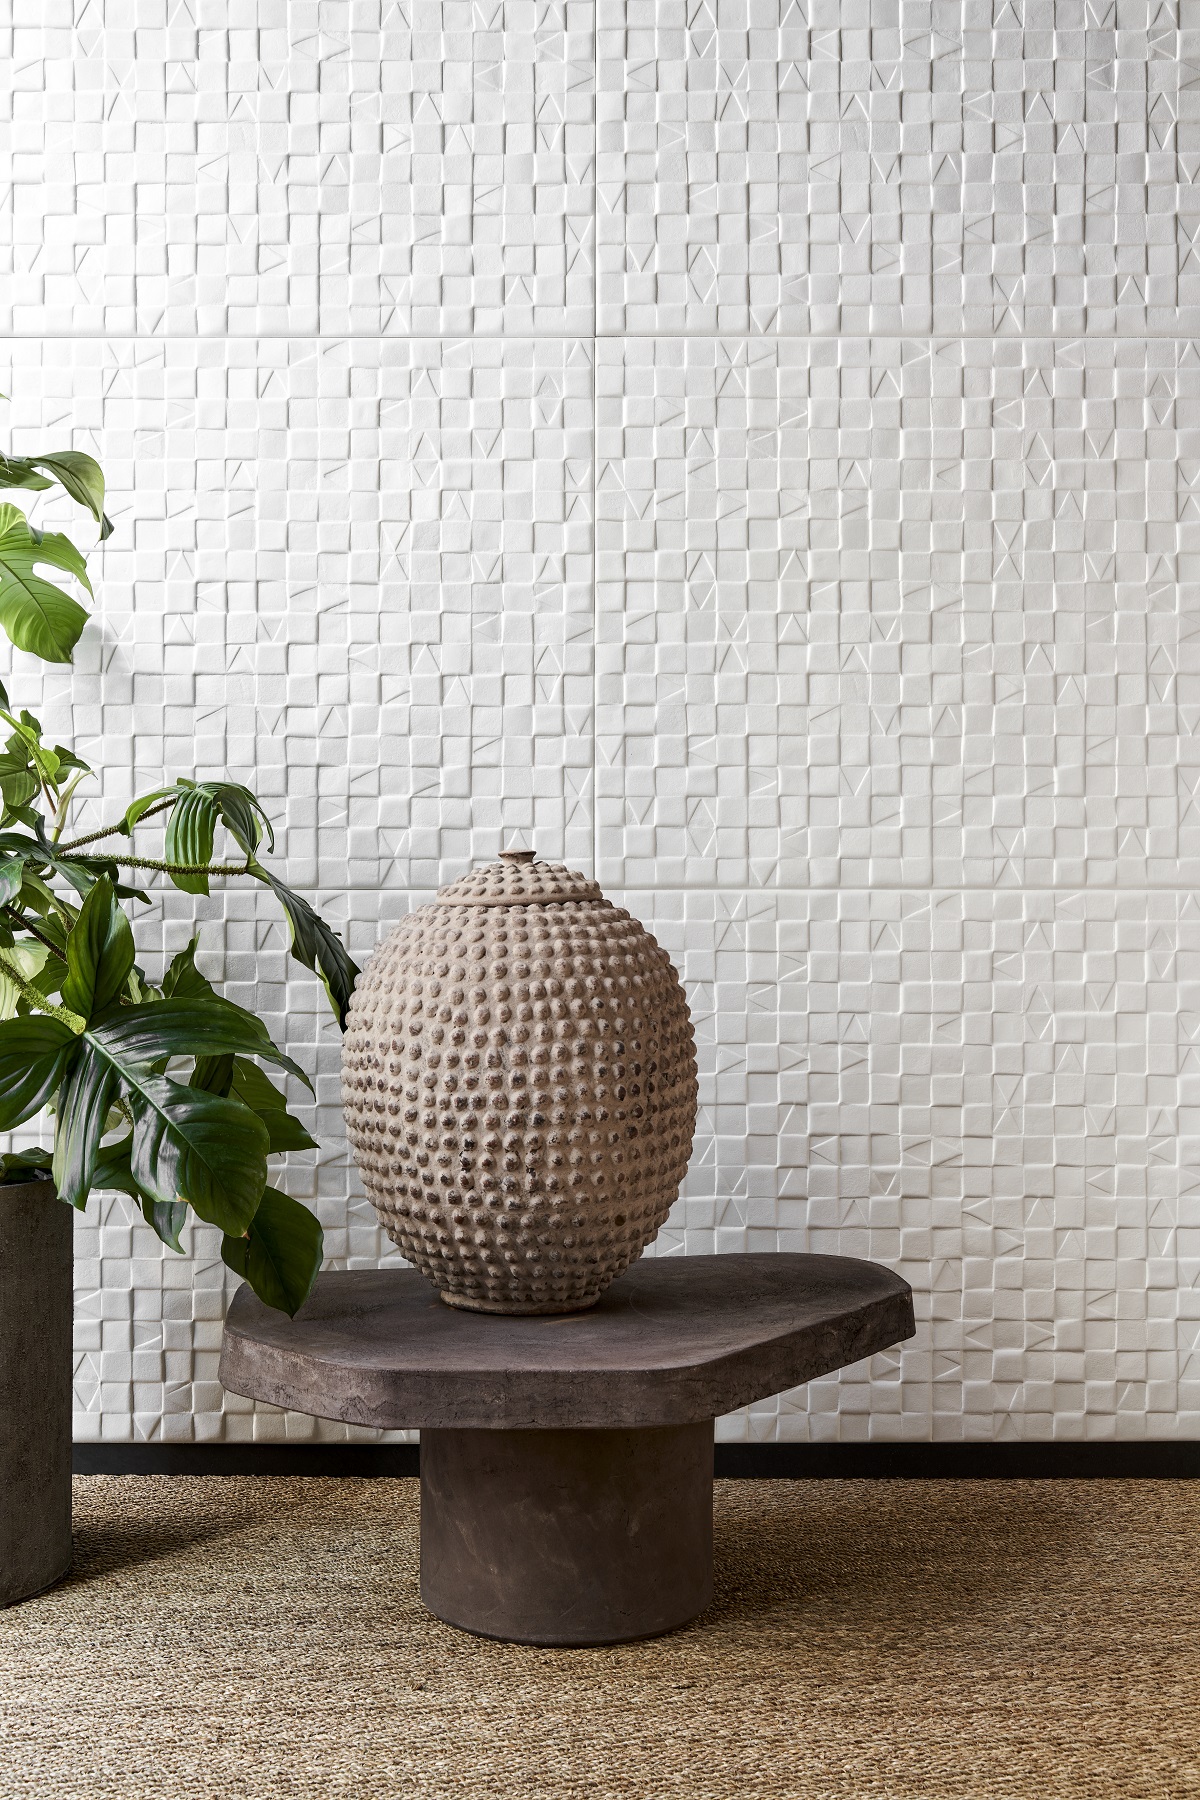 wooden table and clay pot in front of white adobe textured wallcovering